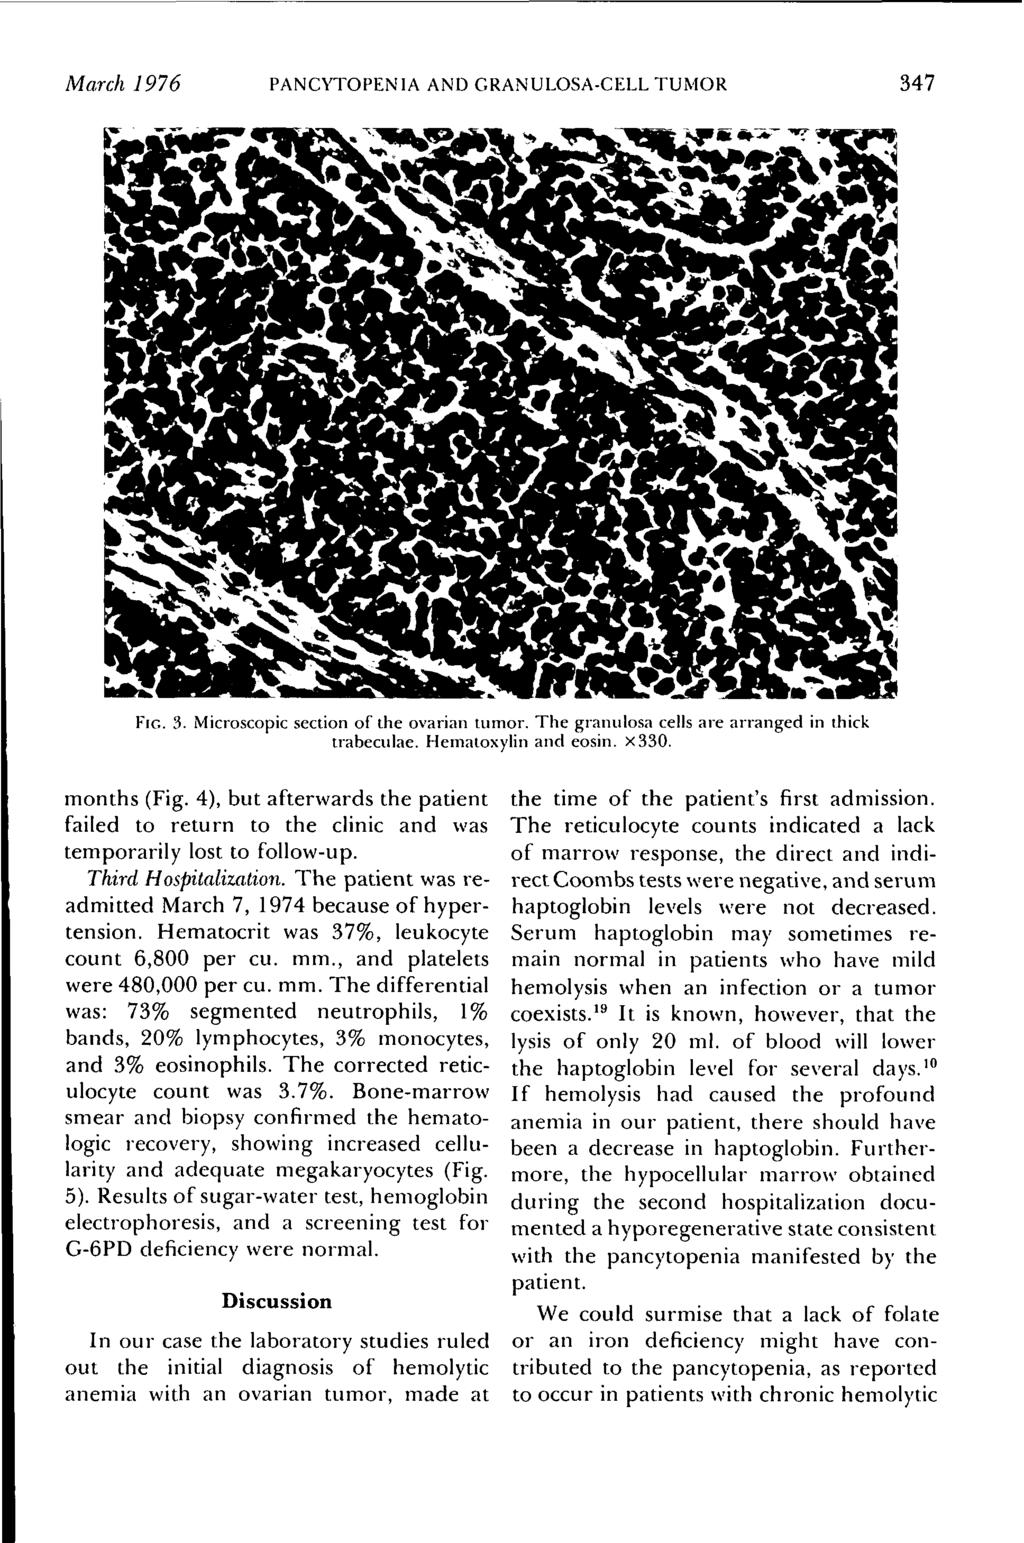 March 1976 PANCYTOPENIA AND GRANULOSA-CELL TUMOR 347 FIG. 3. Microscopic section of the ovarian tumor. The granulosa cells are arranged in thick trabeculae. Hematoxylin and eosin. x330. months (Fig.